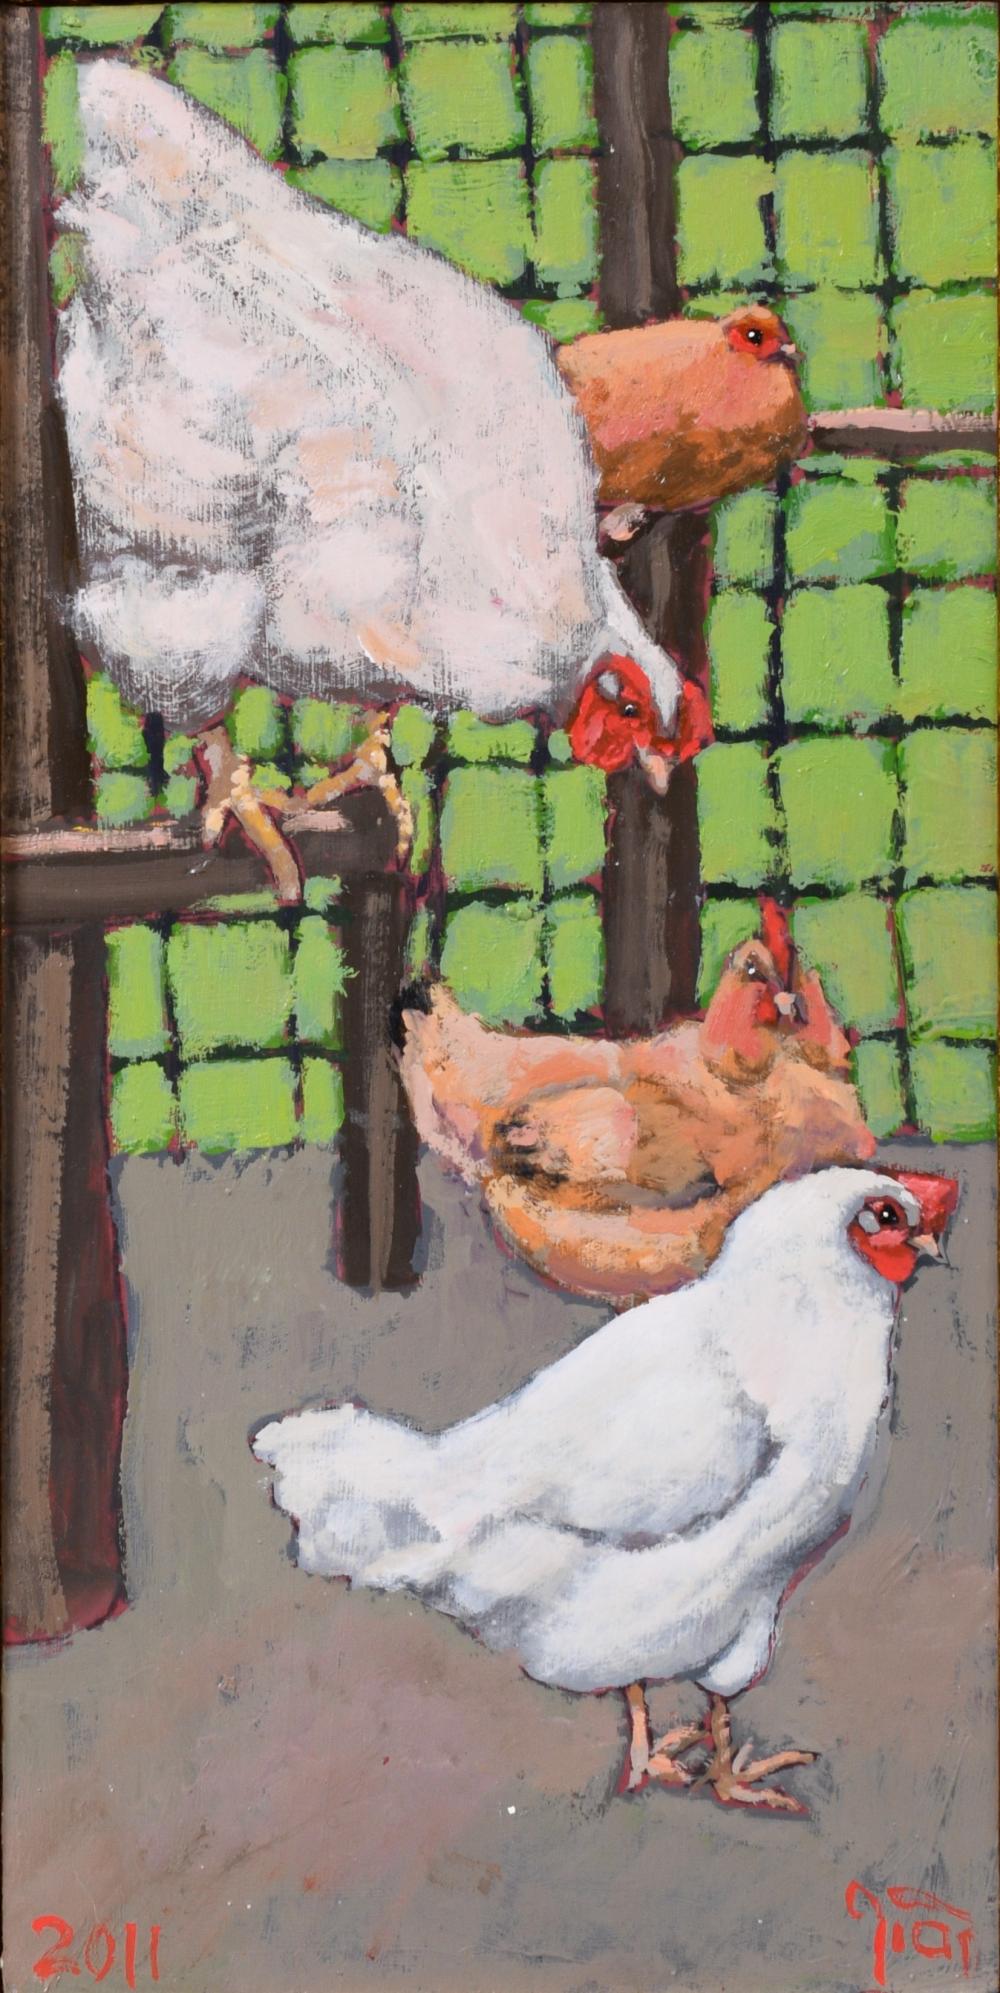 PAINTING OF CHICKENSPAINTING OF